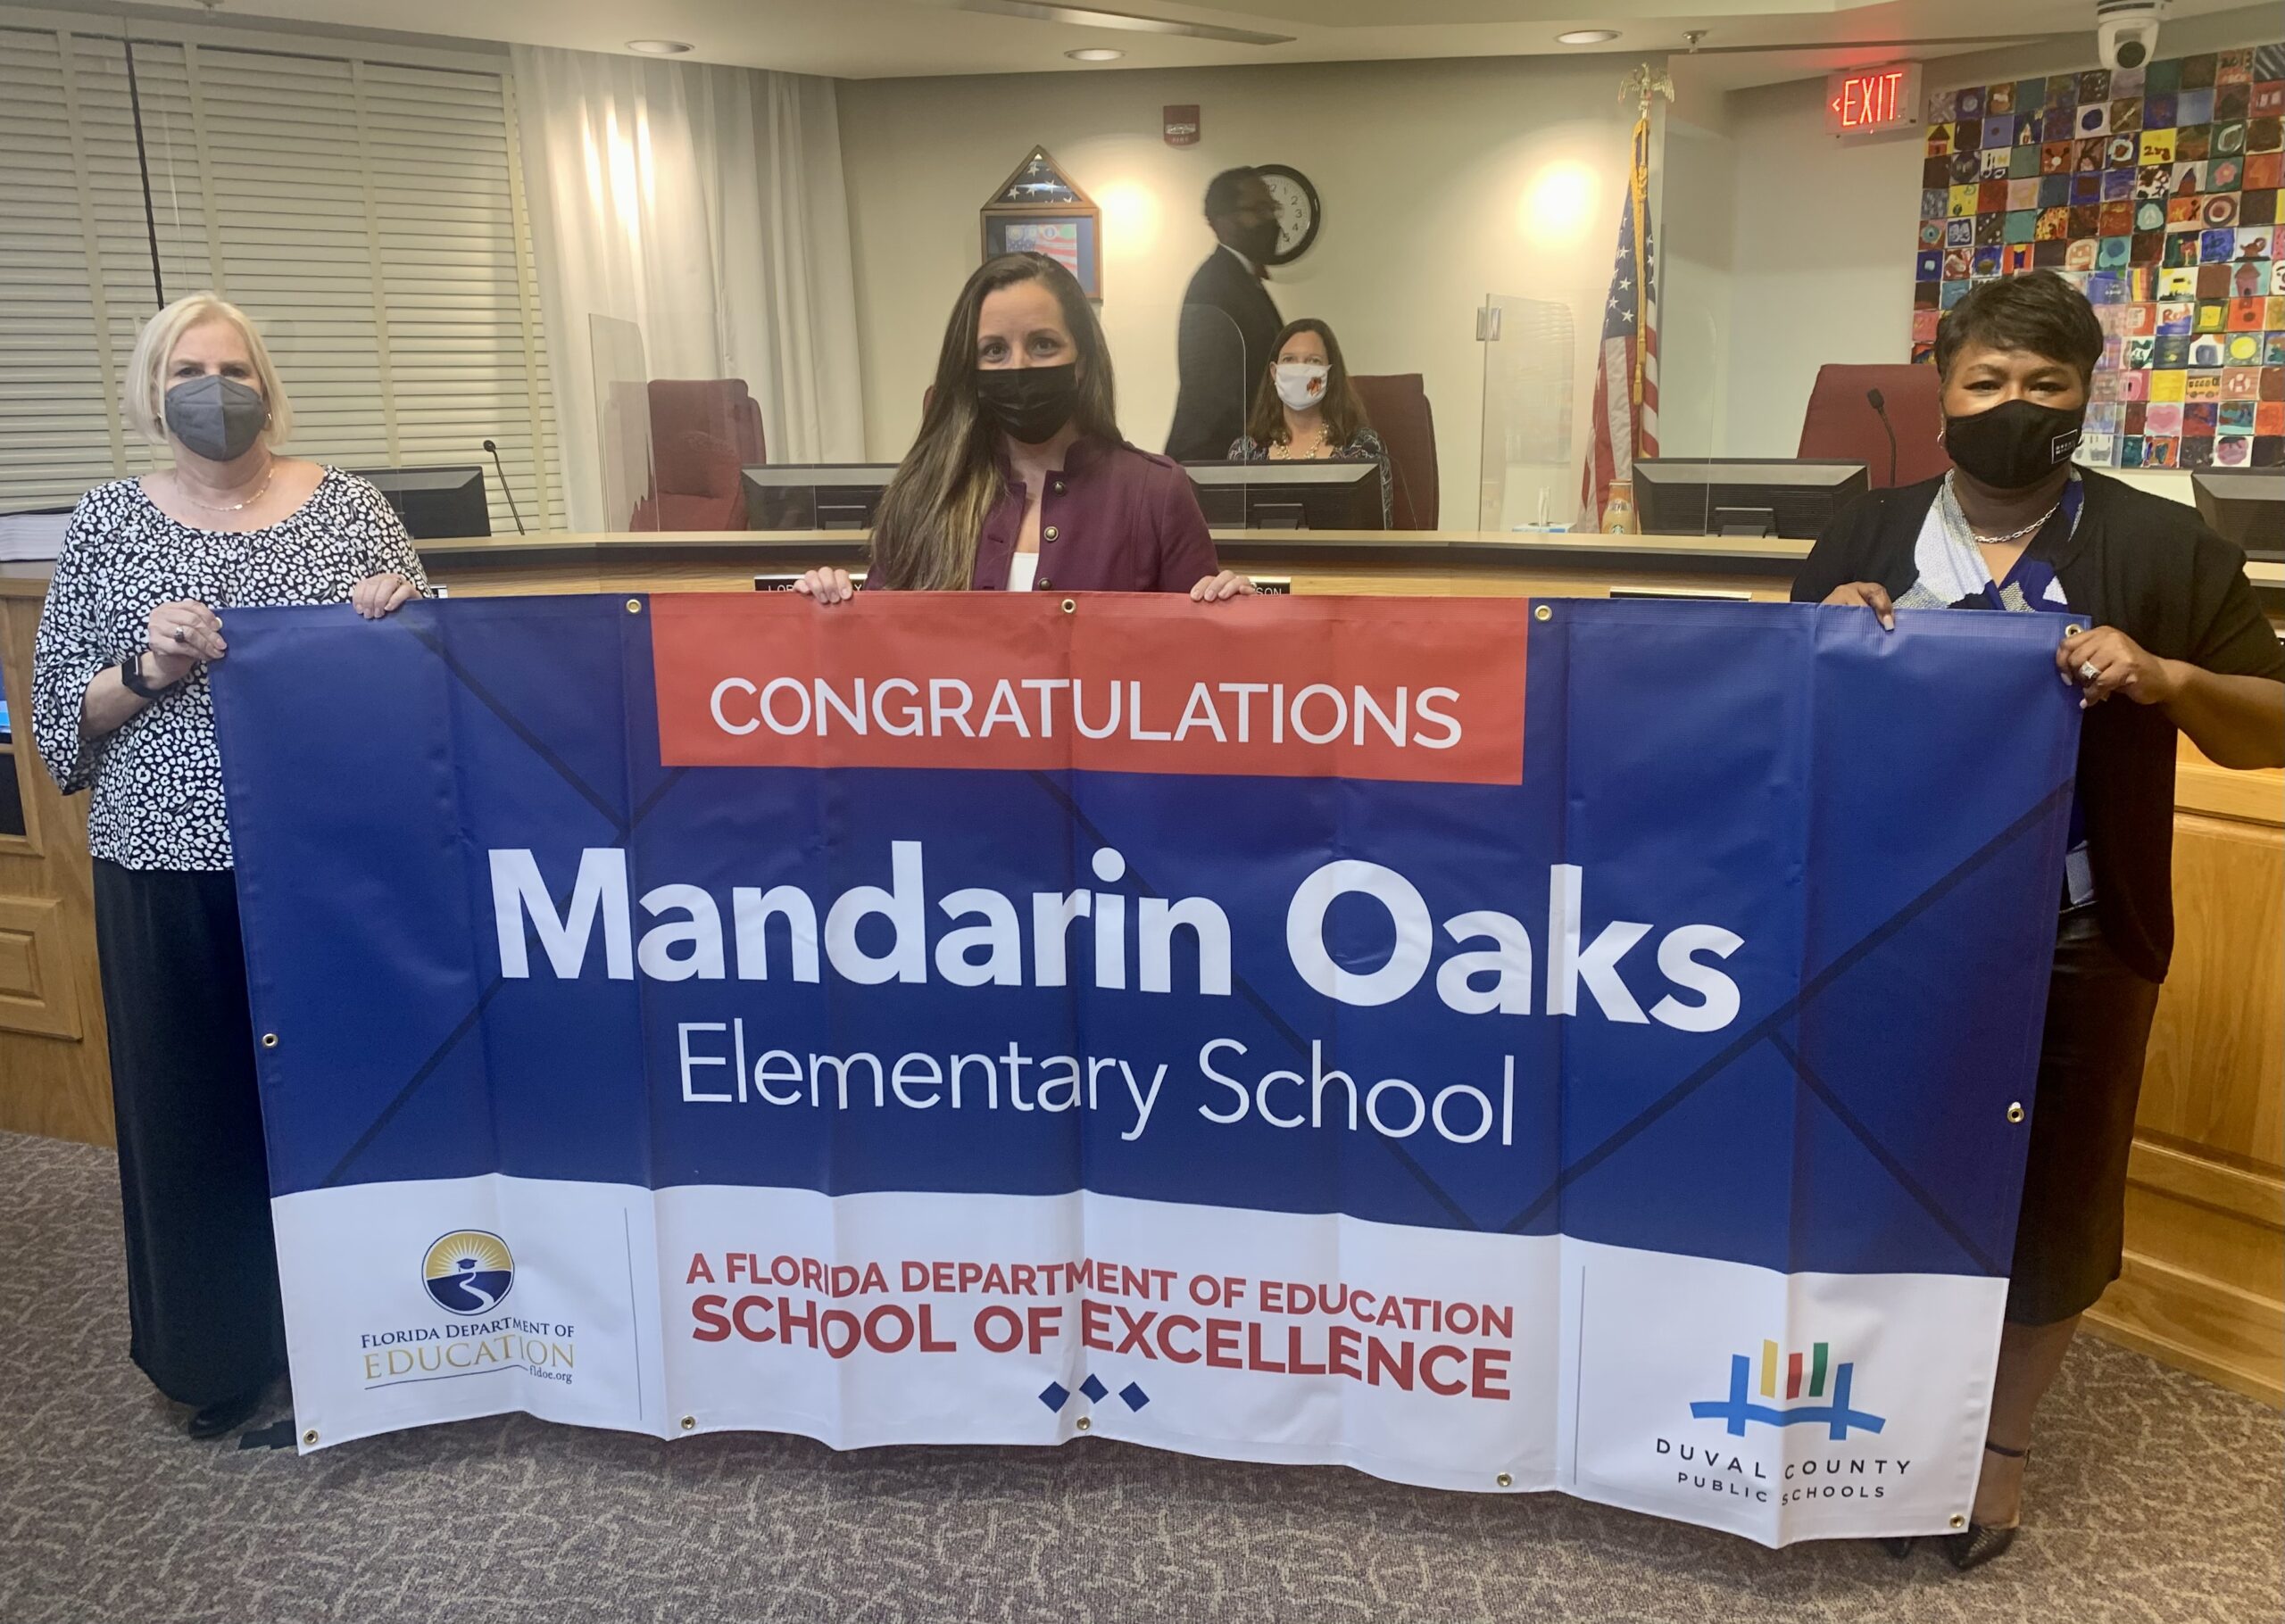 Superintendent, Board Member and school administrator hold banner Congratulations Mandarin Oaks Elementary School a Florida Department of Education School of Excellence